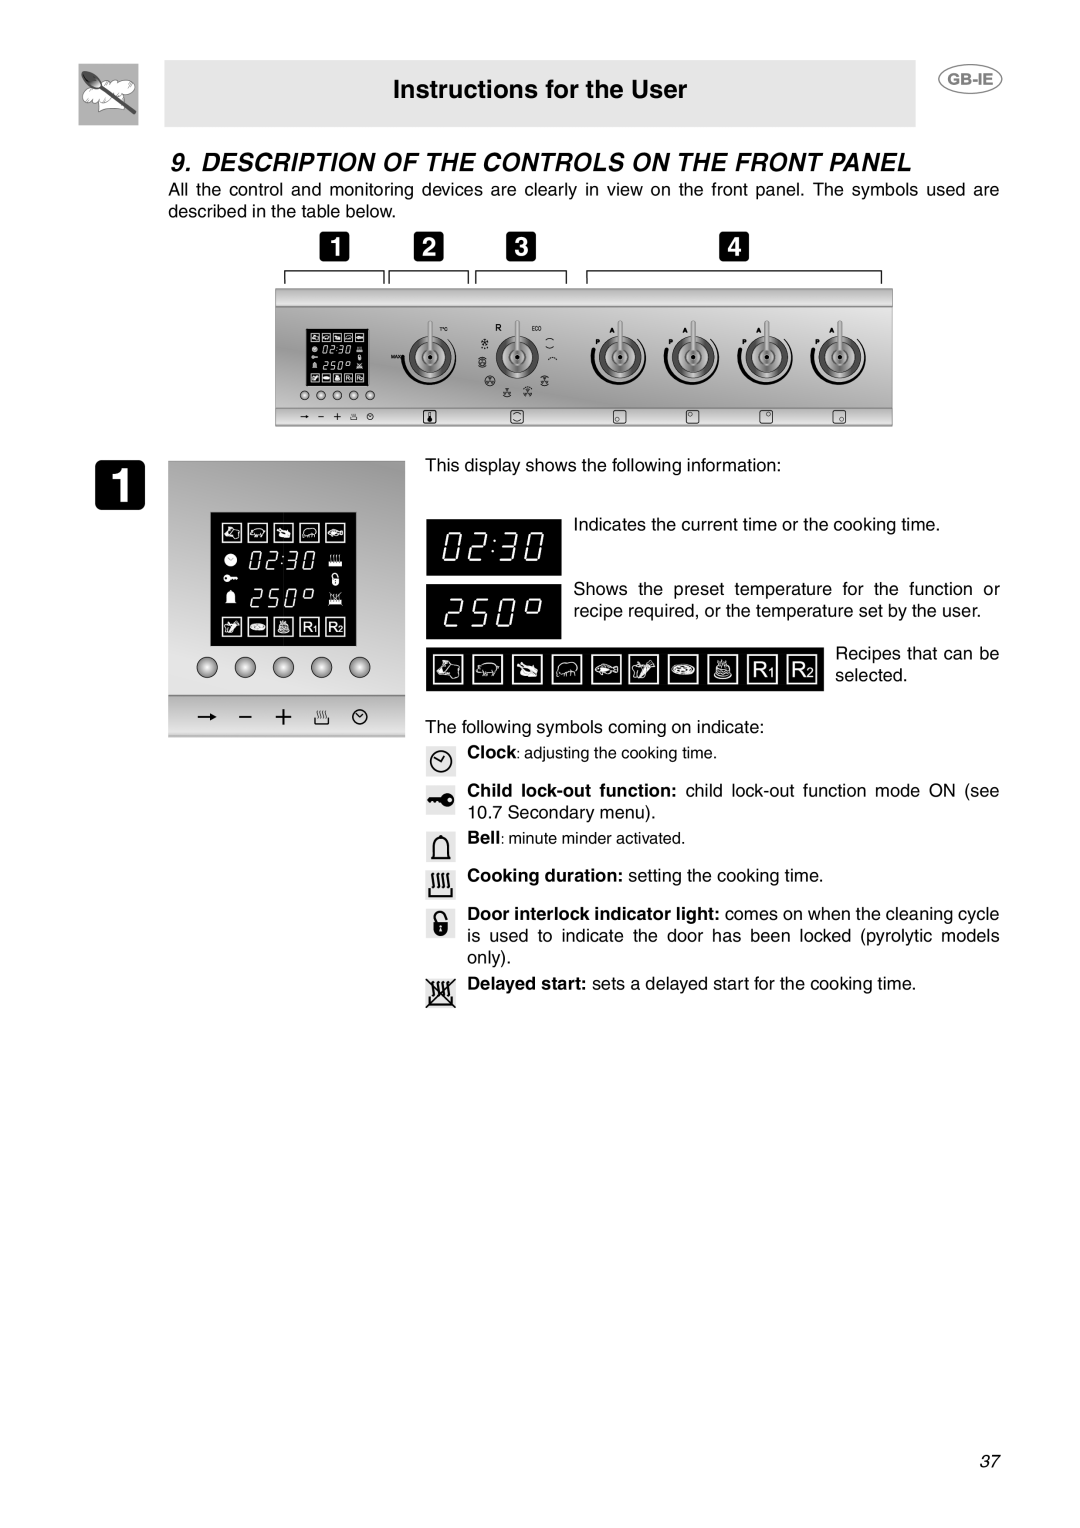 Smeg CE6IMX manual Description Of The Controls On The Front Panel, Instructions for the User 